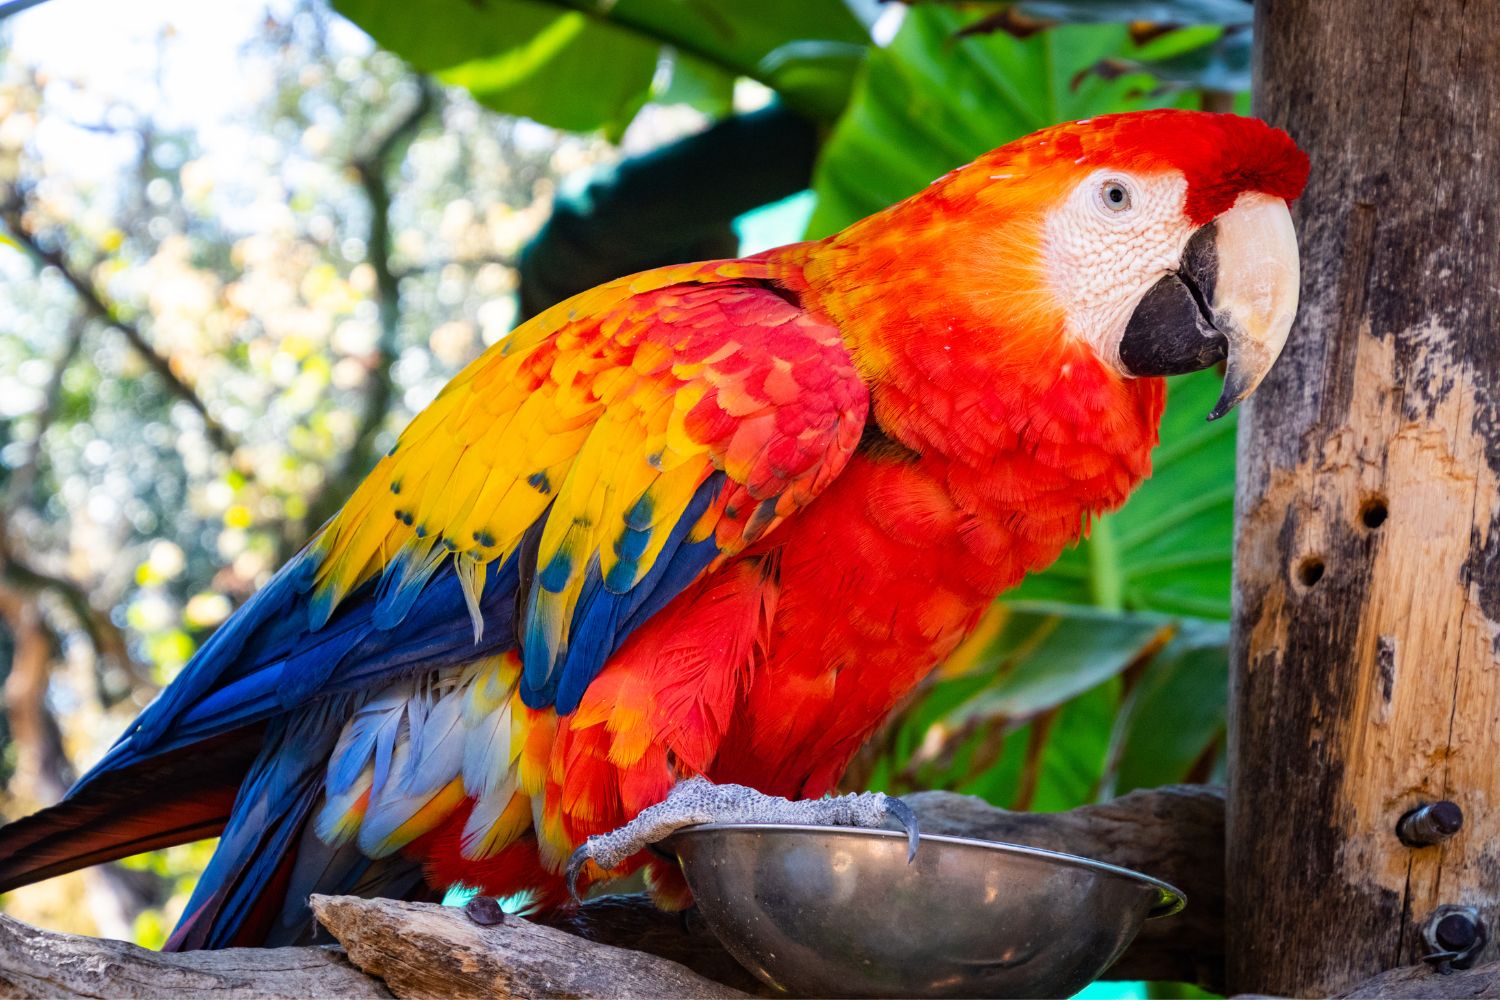 a colorful parrot eating food